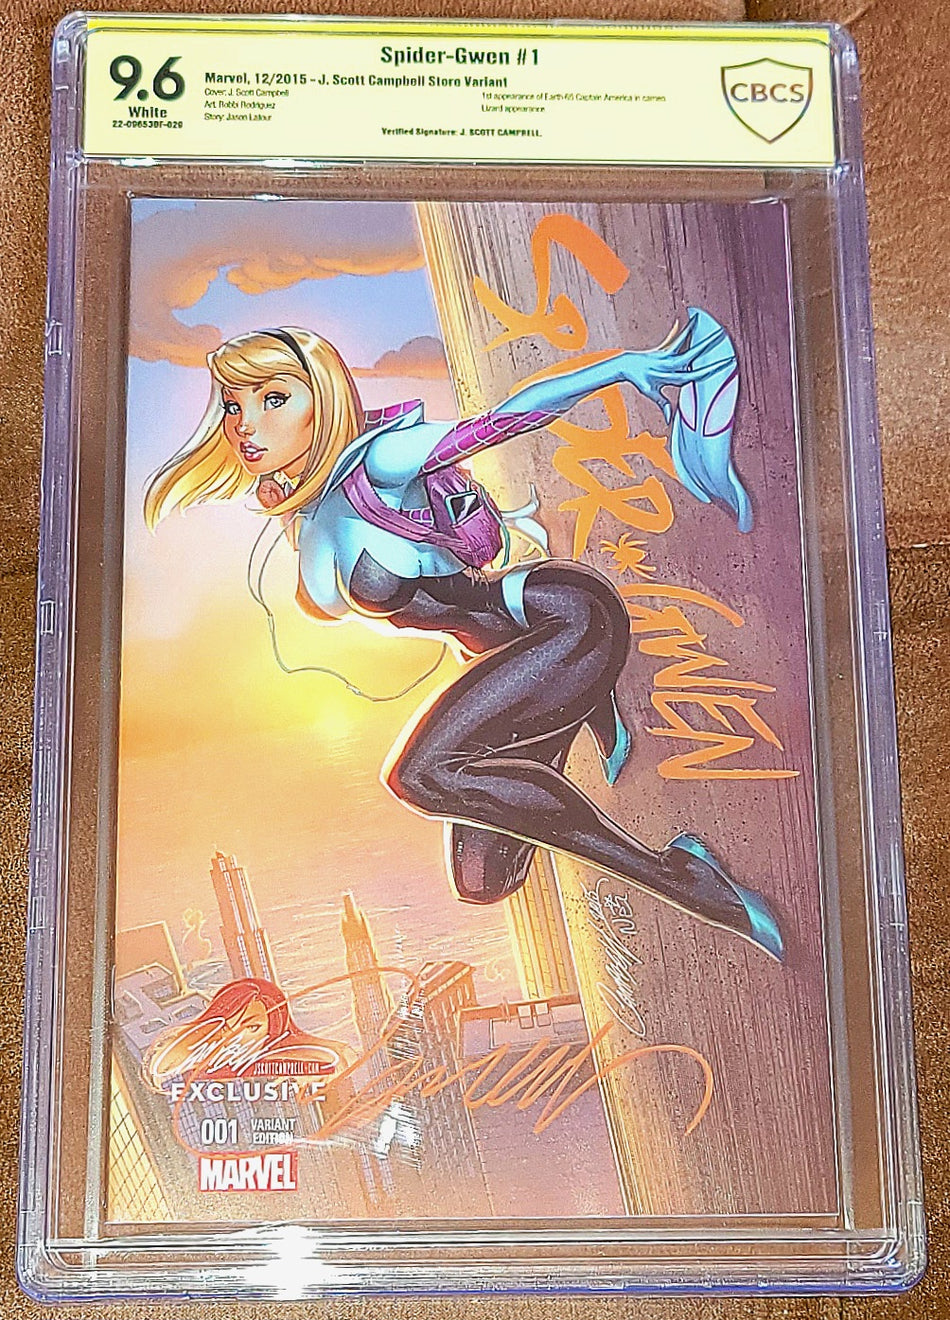 Spider-Gwen #1 (2015) JSC J Scott Campbell Exclusive CBCS 9.6 VERIFIED SIGNATURE by Campbell w/ COA (1st Appearance of Earth-65 Captain America in Cameo)